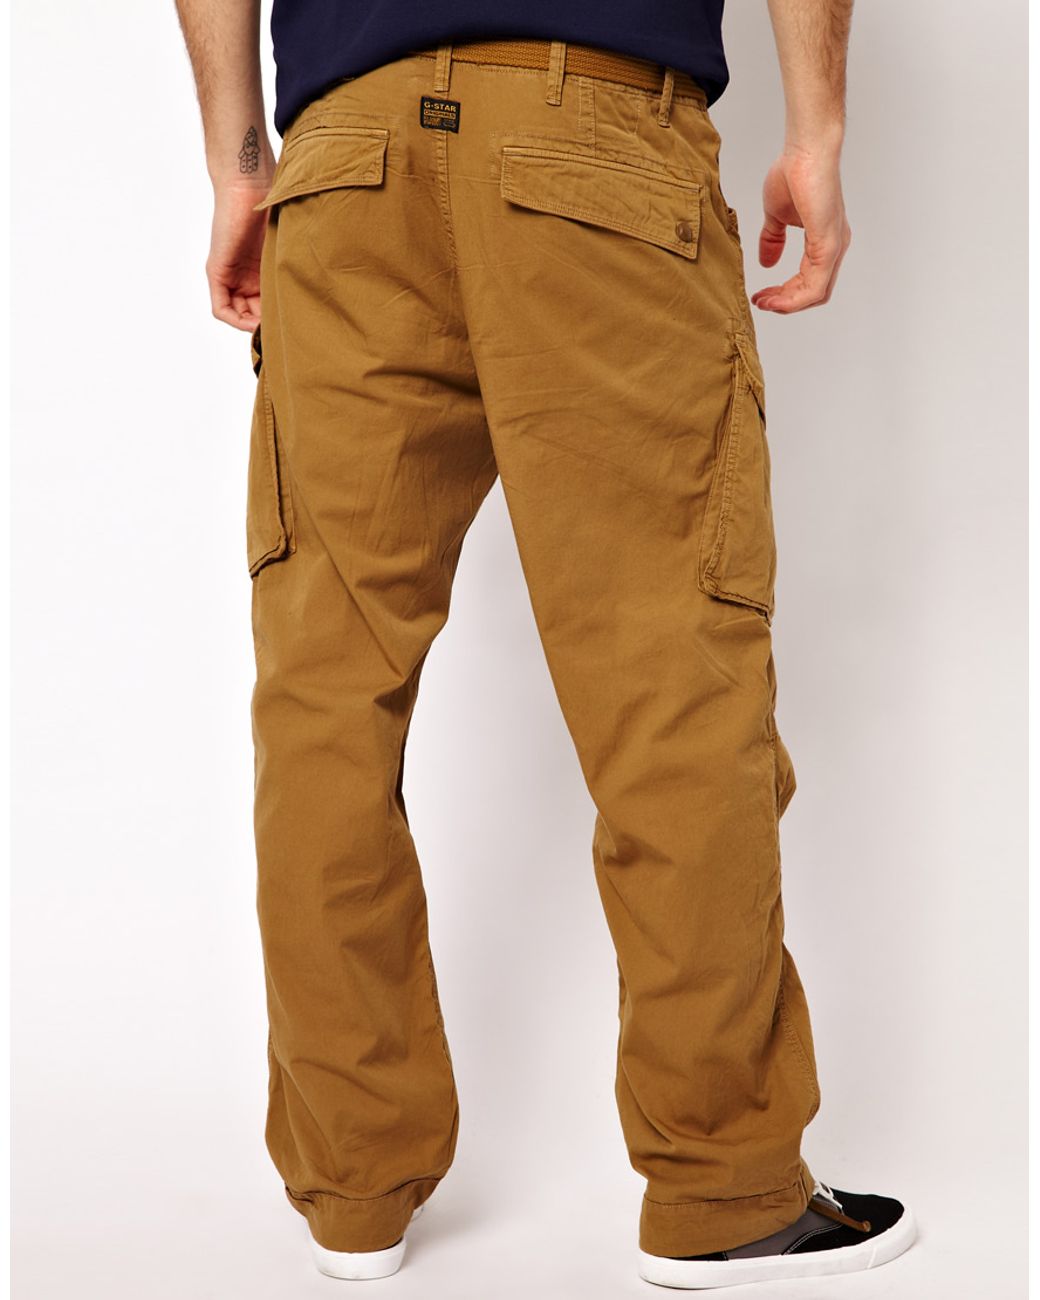 G-Star Rovic Zip 3D straight tapered fit pants in khaki | ASOS